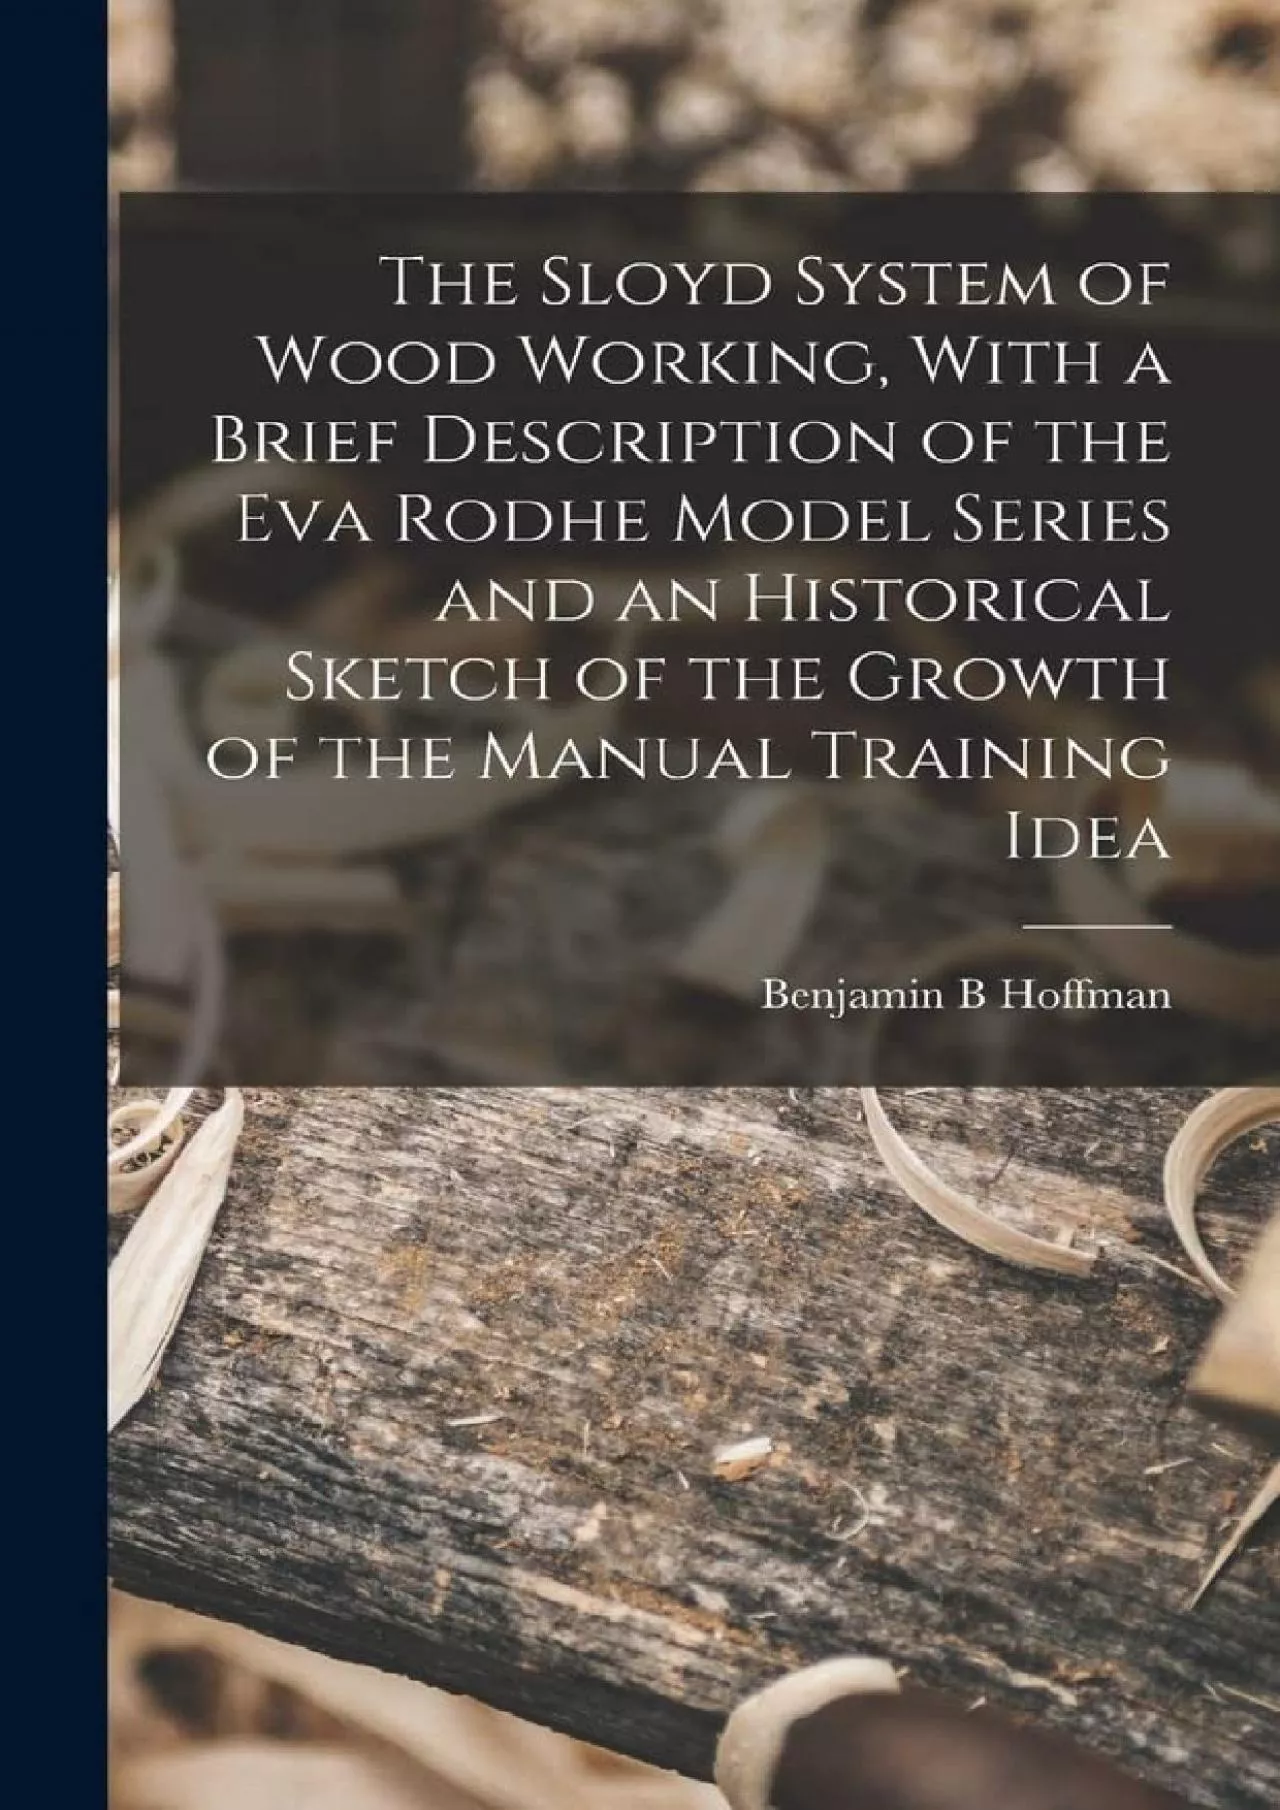 [READ] The Sloyd System of Wood Working, With a Brief Description of the Eva Rodhe Model